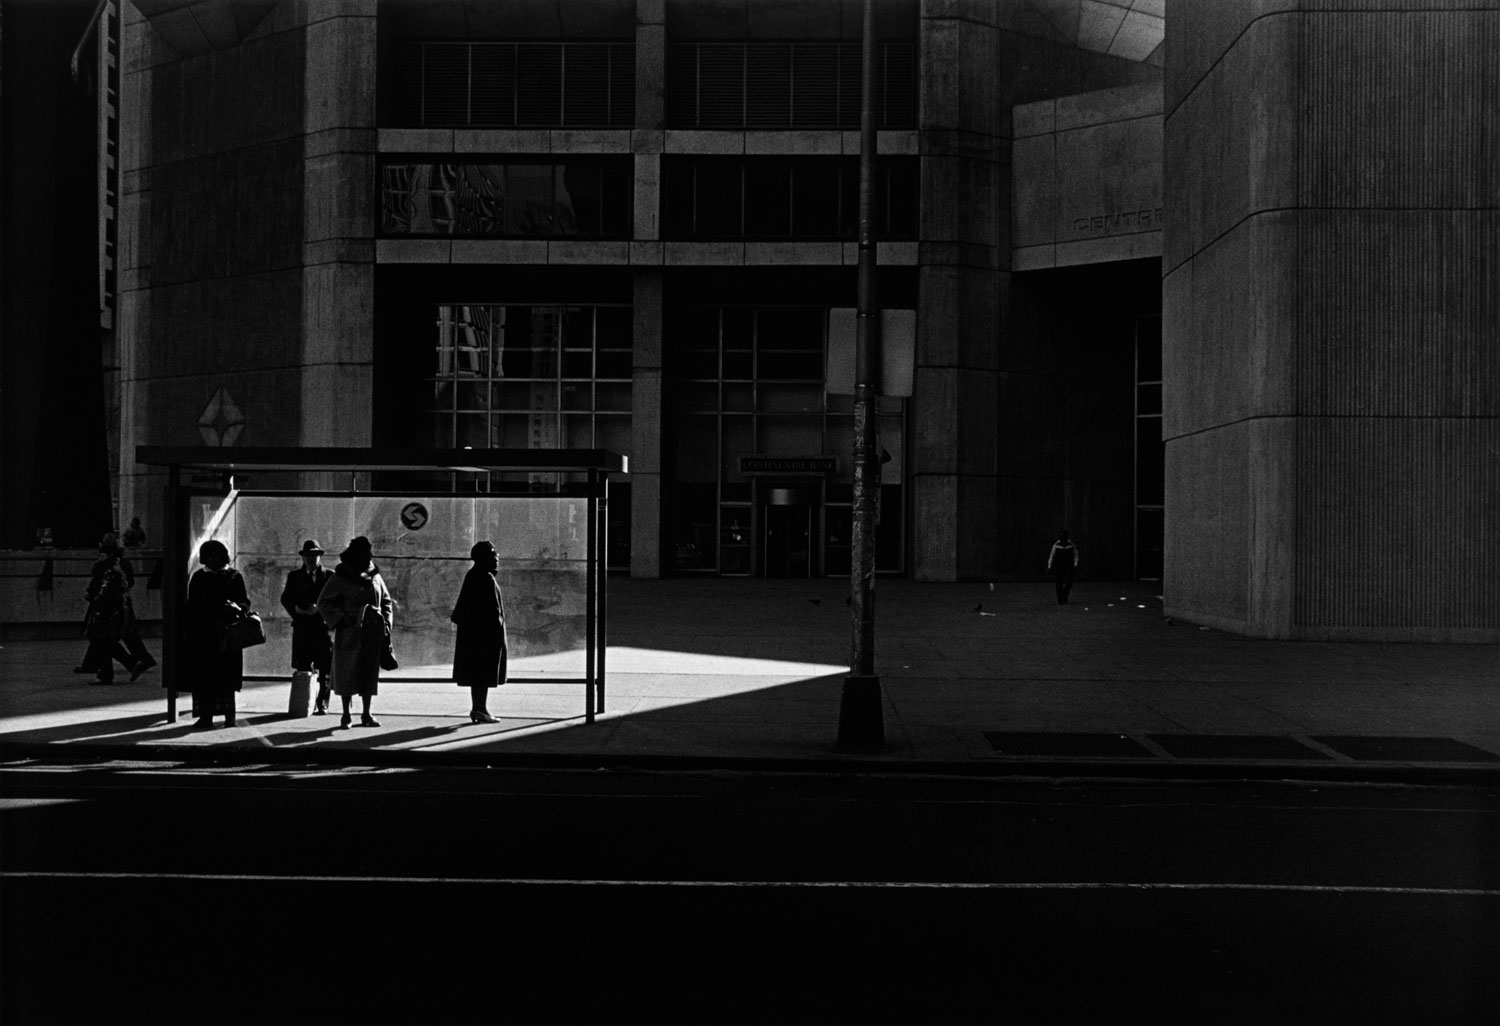 Black-and-white photo of people waiting for bus in angled patch of light against dark city landscape